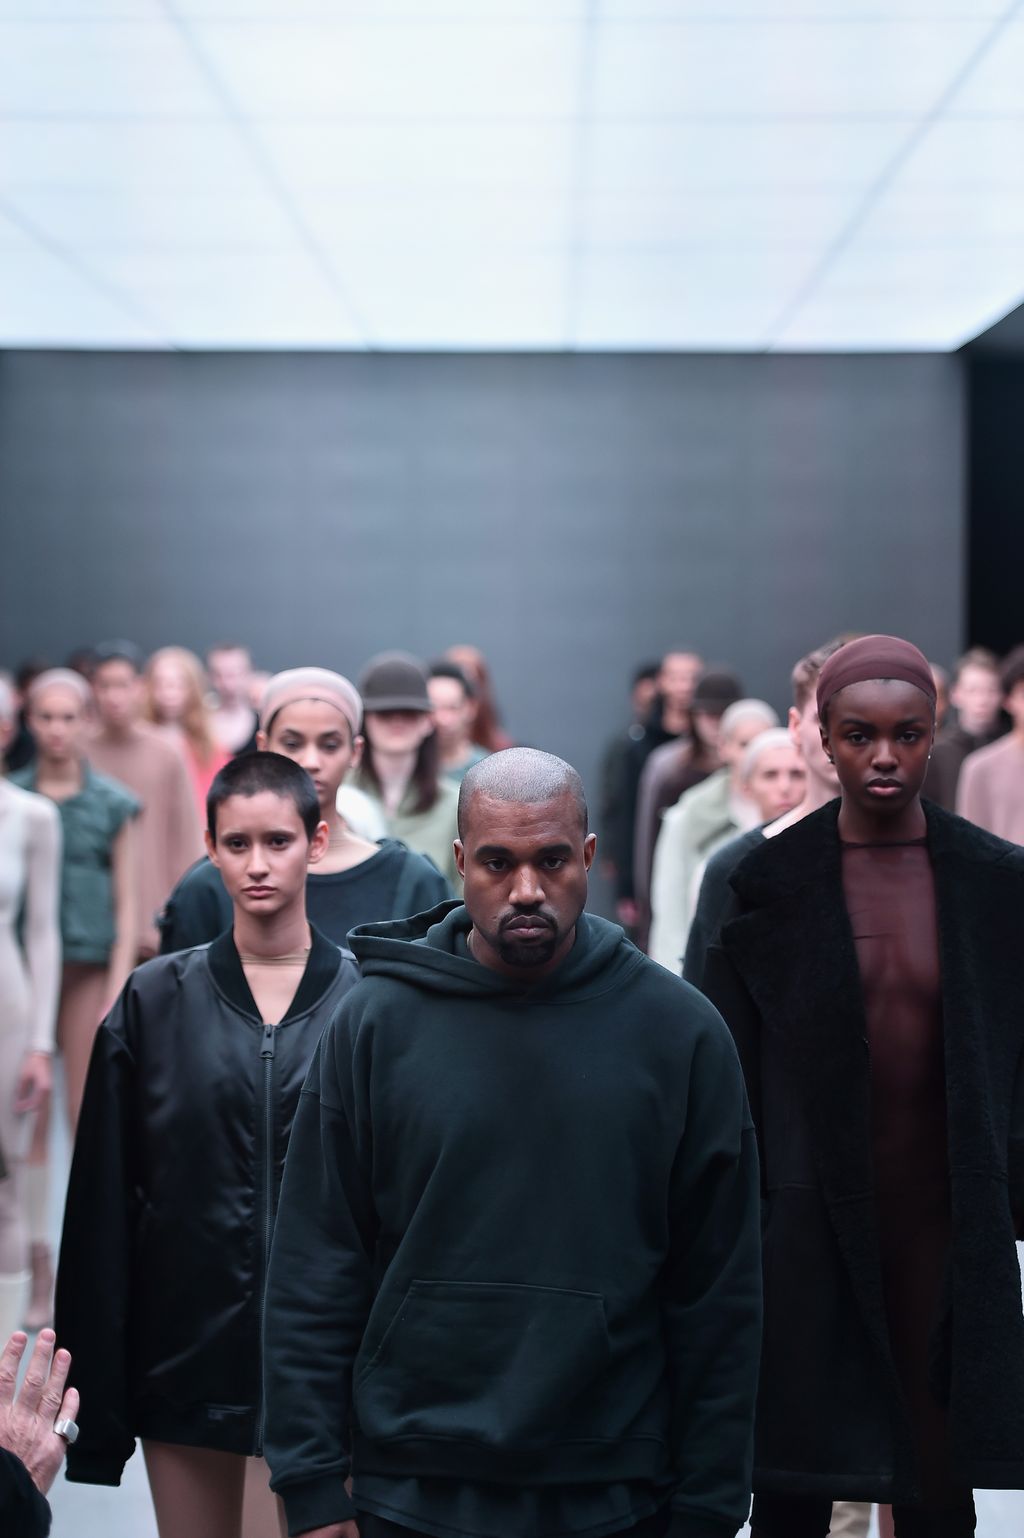 NEW YORK, NY - FEBRUARY 12:  Kanye West on the runway at the adidas Originals x Kanye West YEEZY SEASON 1 fashion show during New York Fashion Week Fall 2015 at Skylight Clarkson Sq on February 12, 2015 in New York City.  (Photo by Theo Wargo/Getty Images for adidas)